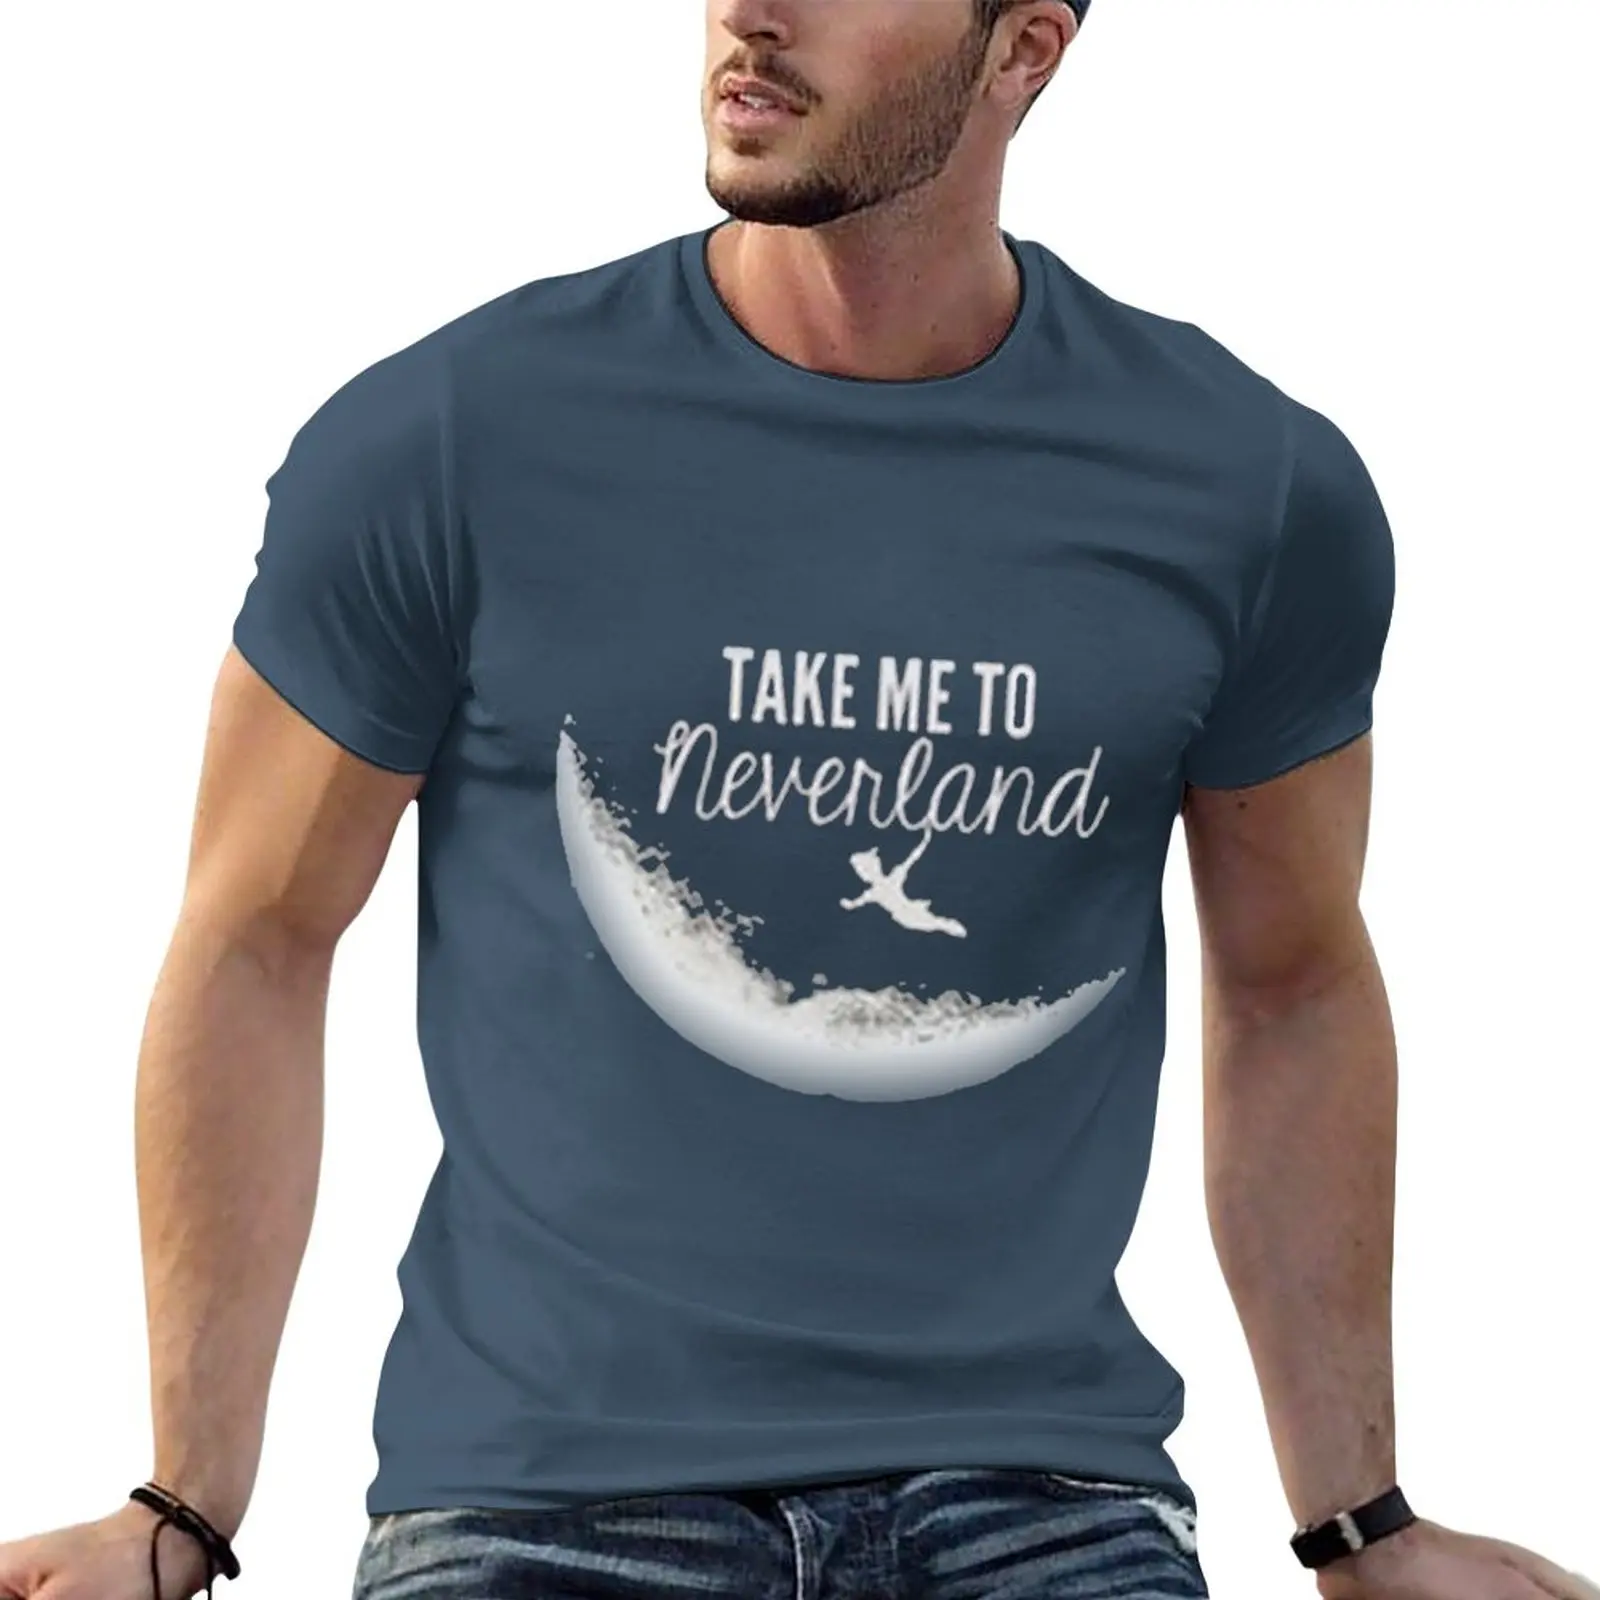 

Take me to Neverland T-Shirt shirts graphic tees vintage clothes T-shirt short graphic t shirt big and tall t shirts for men